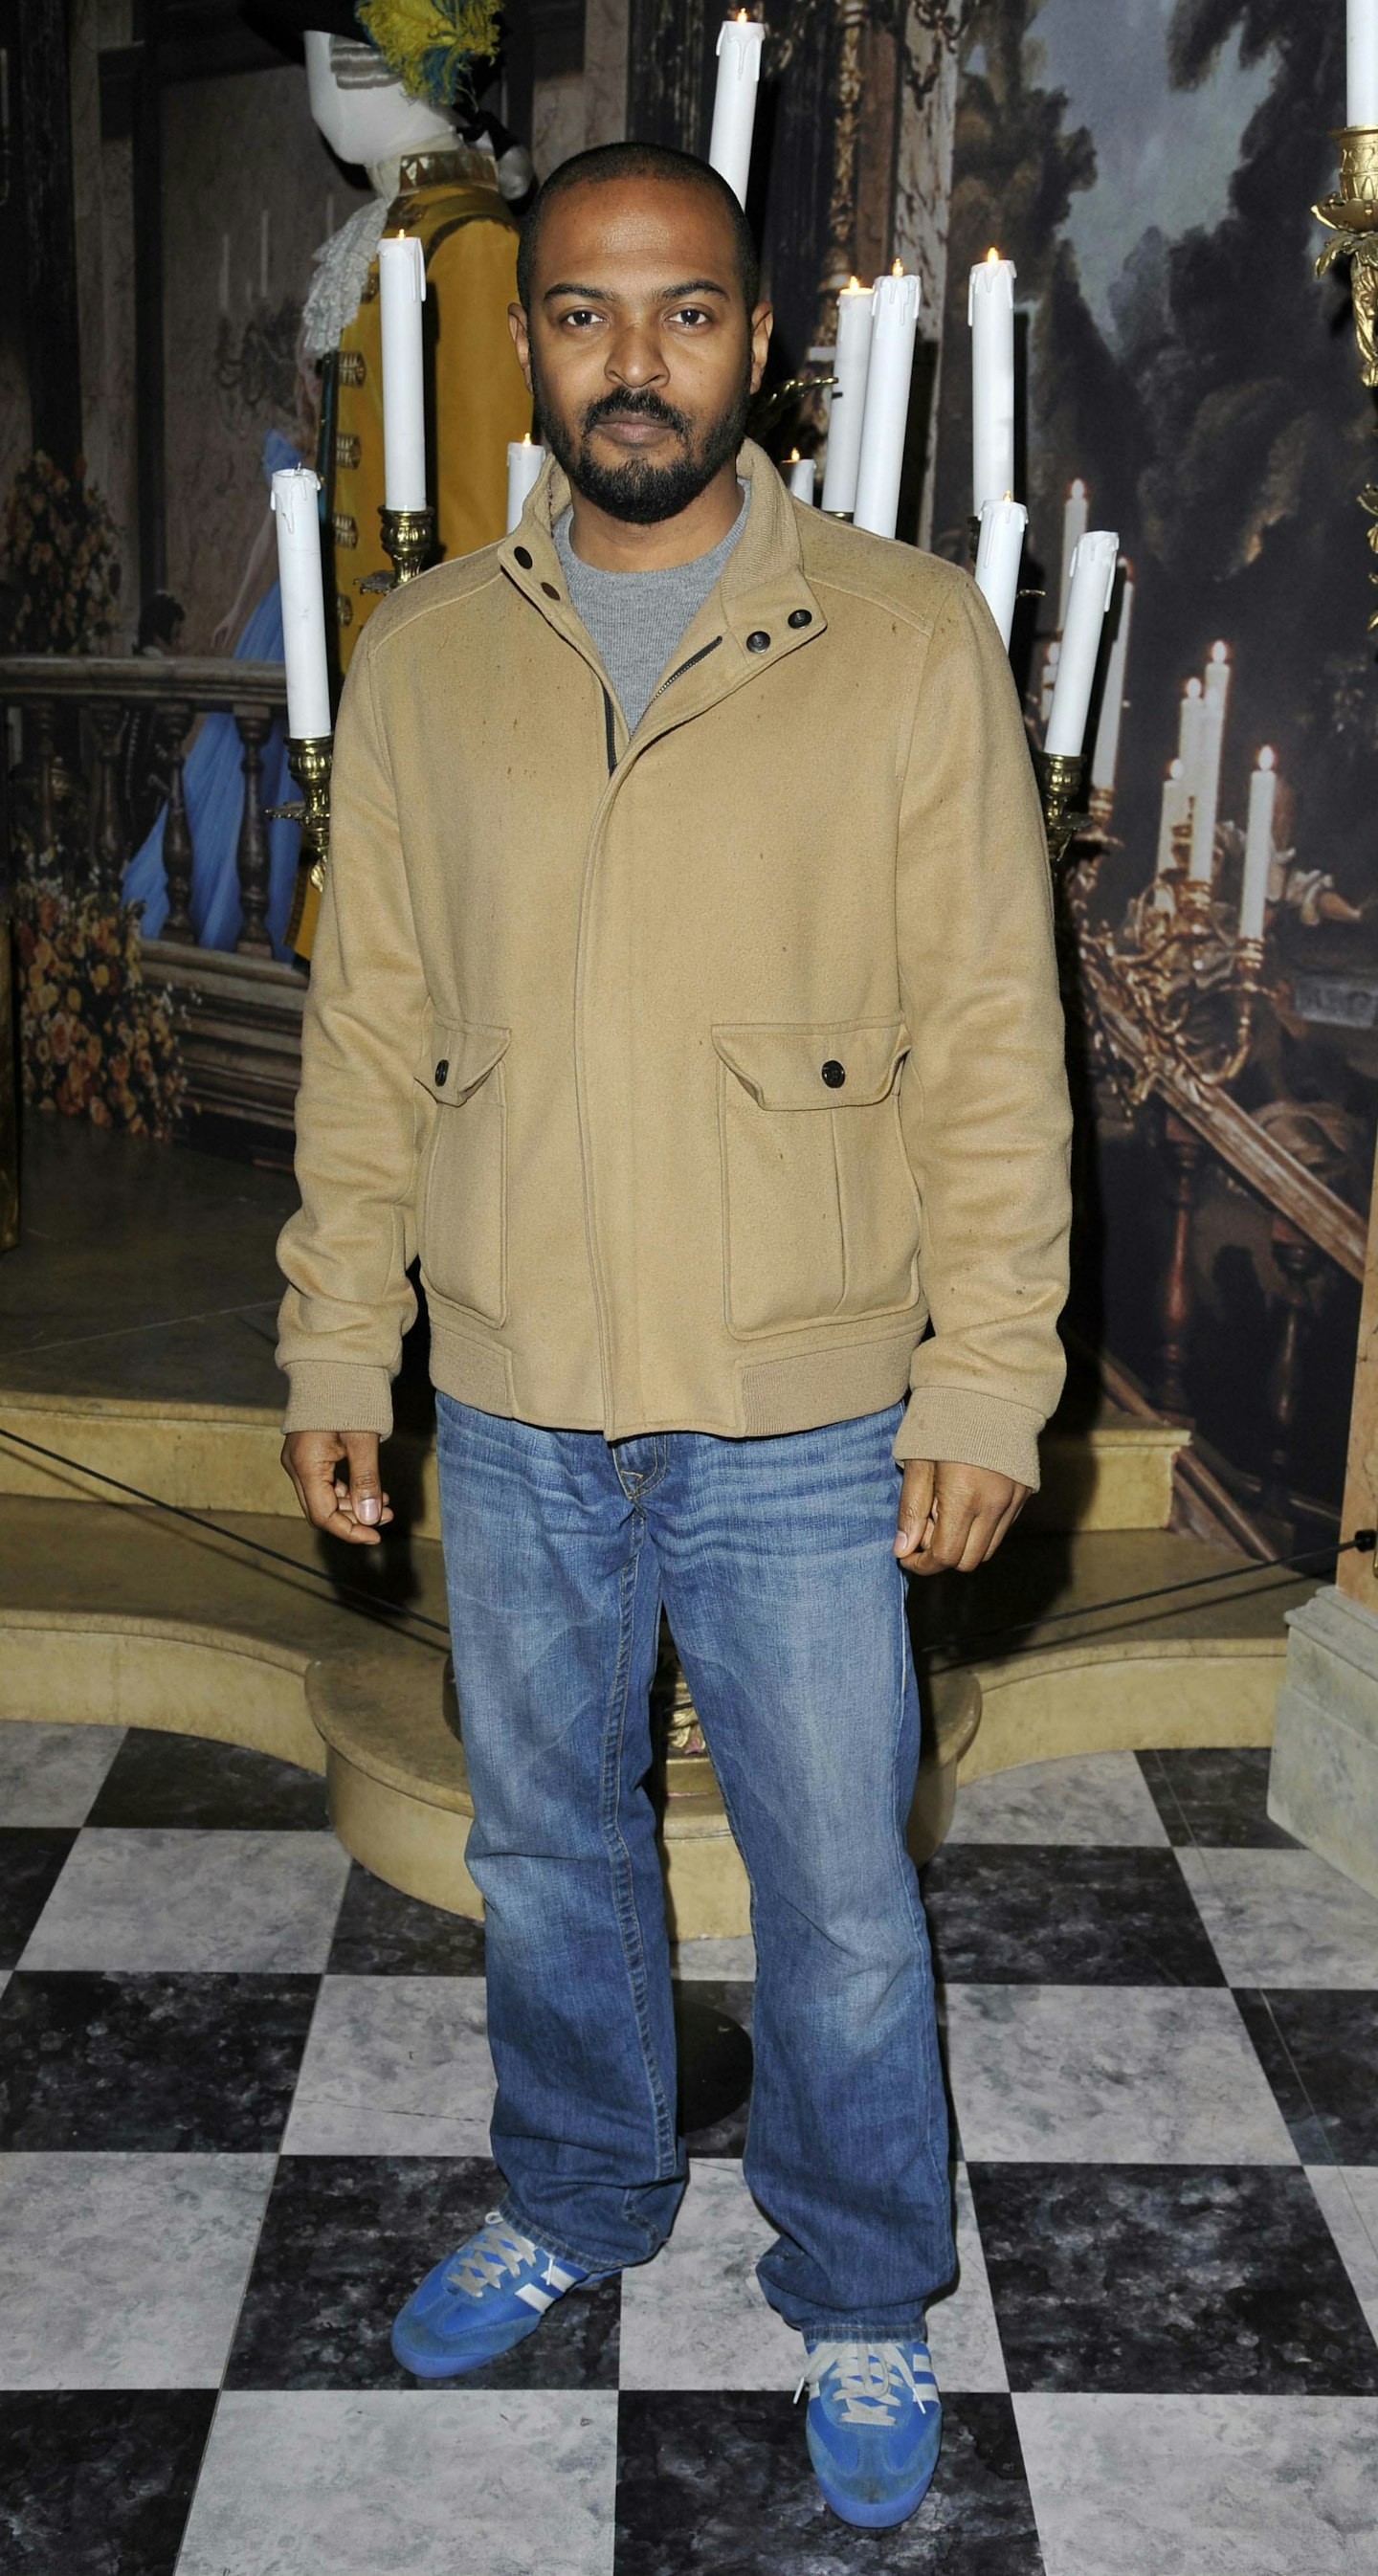 Noel at the Cinderella VIP exhibition preview and film screening in London, in March.